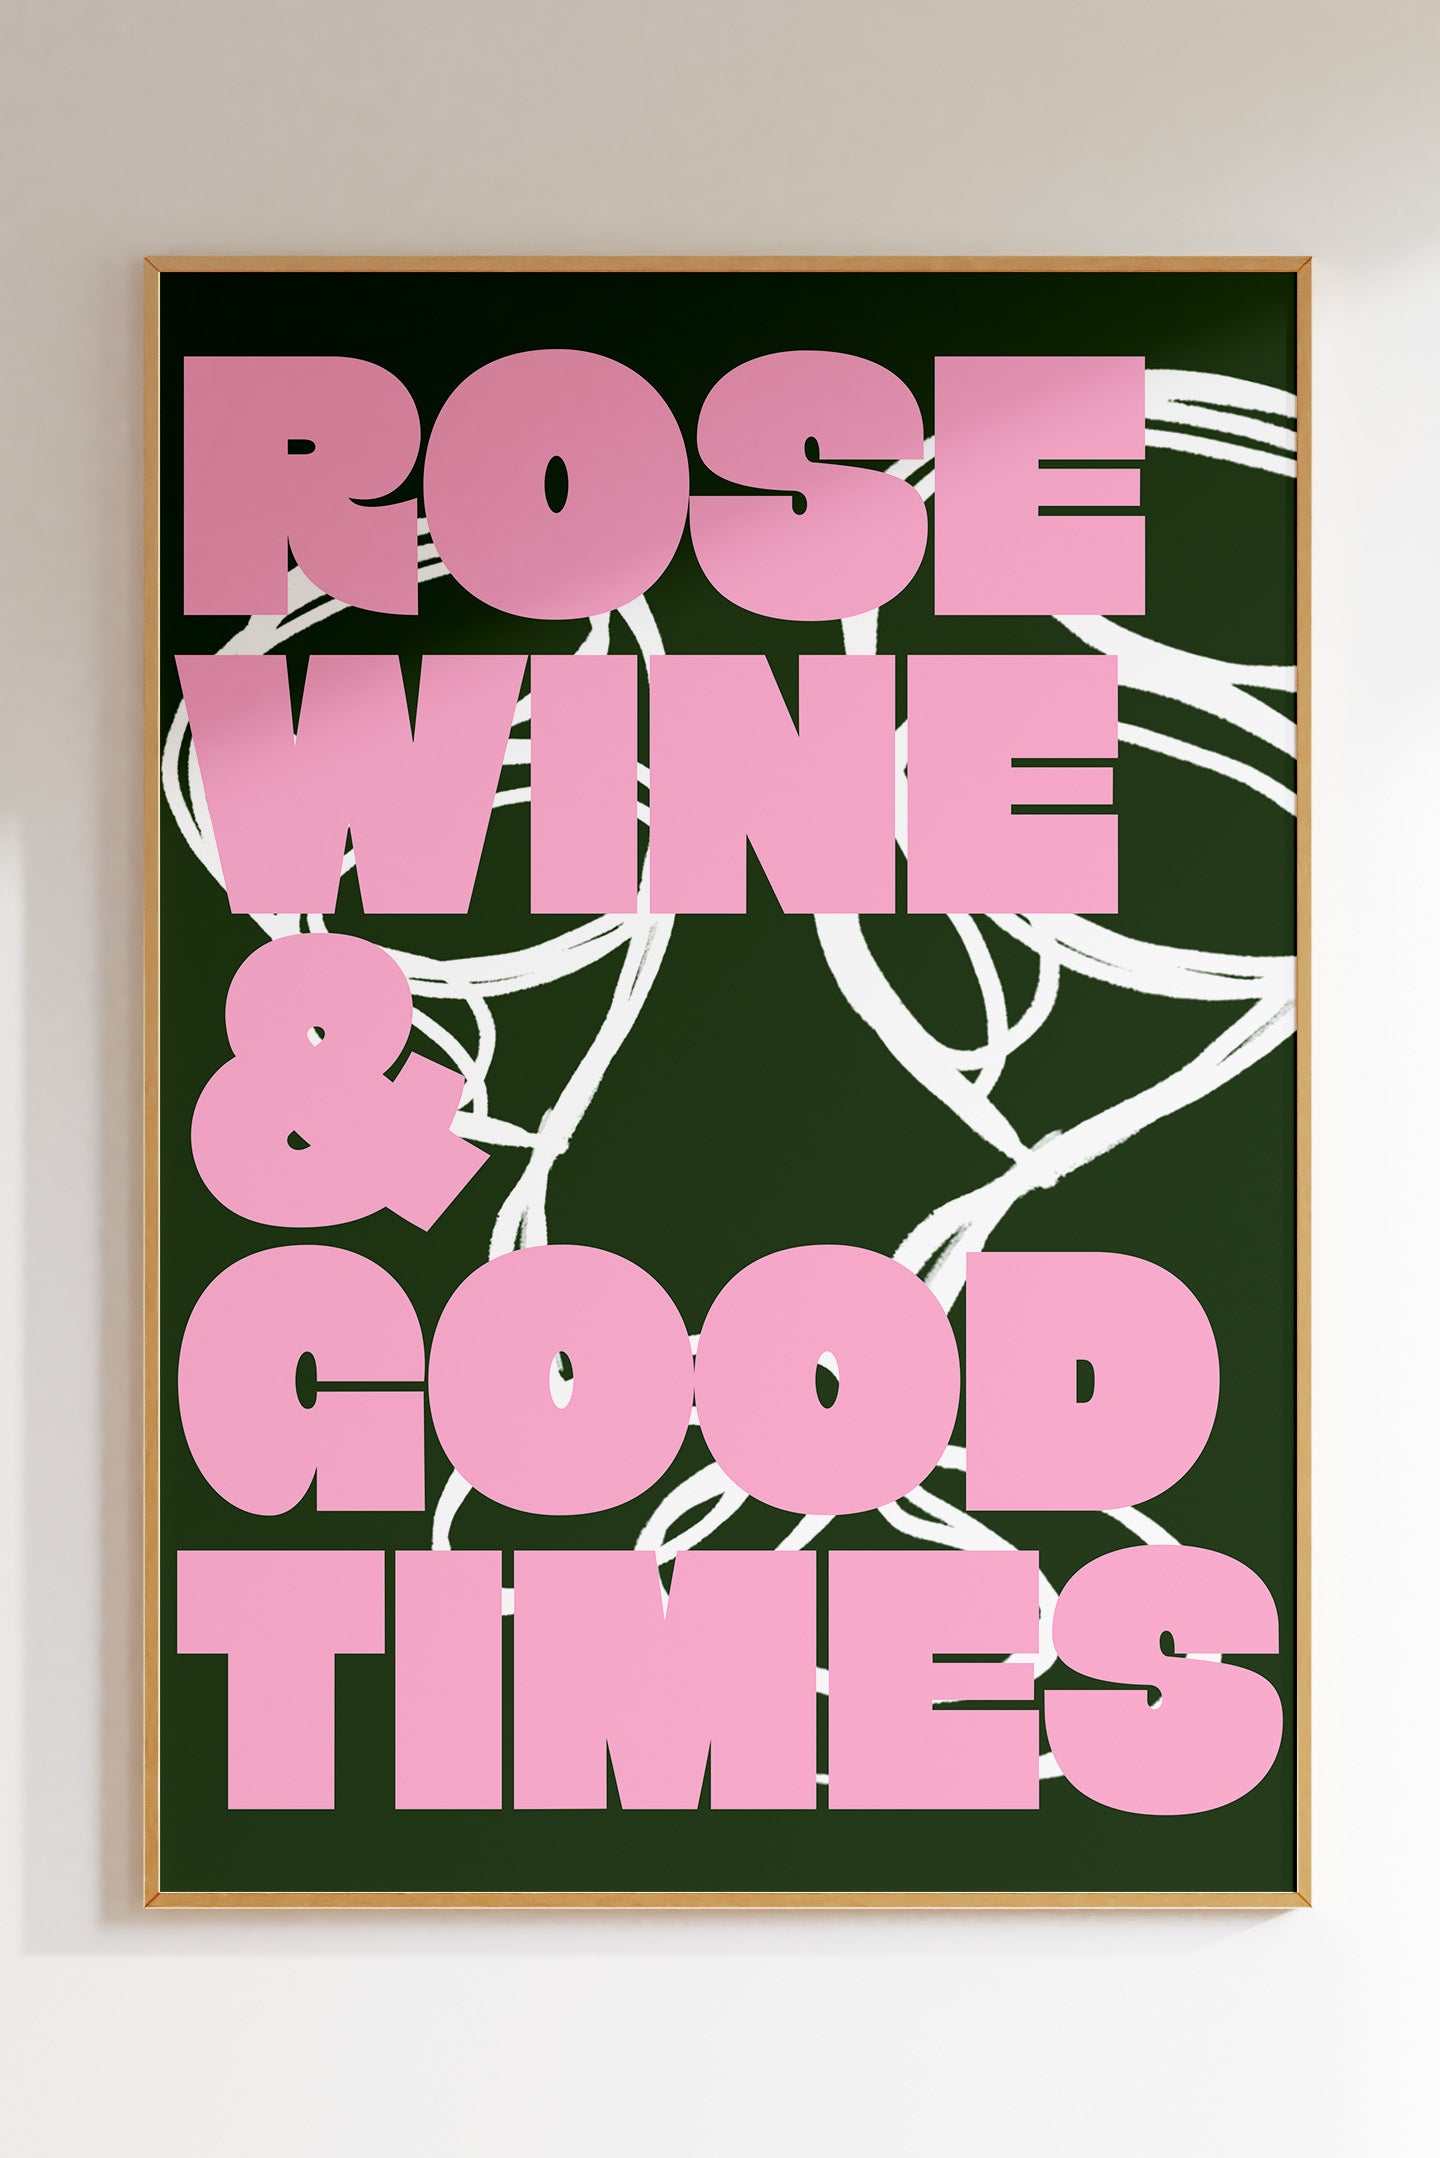 Rose Wine & Good Times (More Colours)